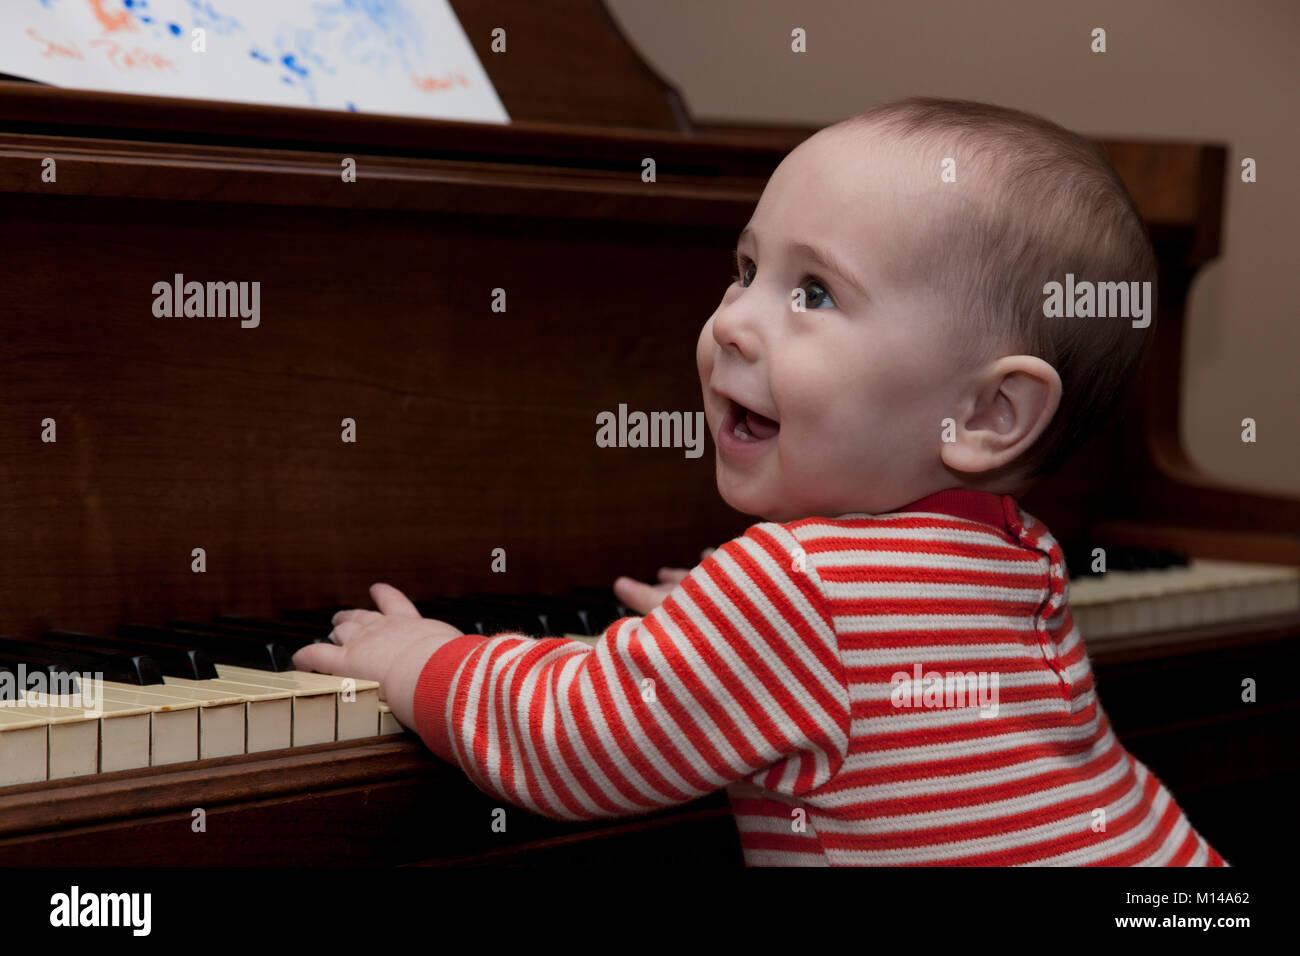 A happy toddler tries his hand on the keys of a piano. Stock Photo